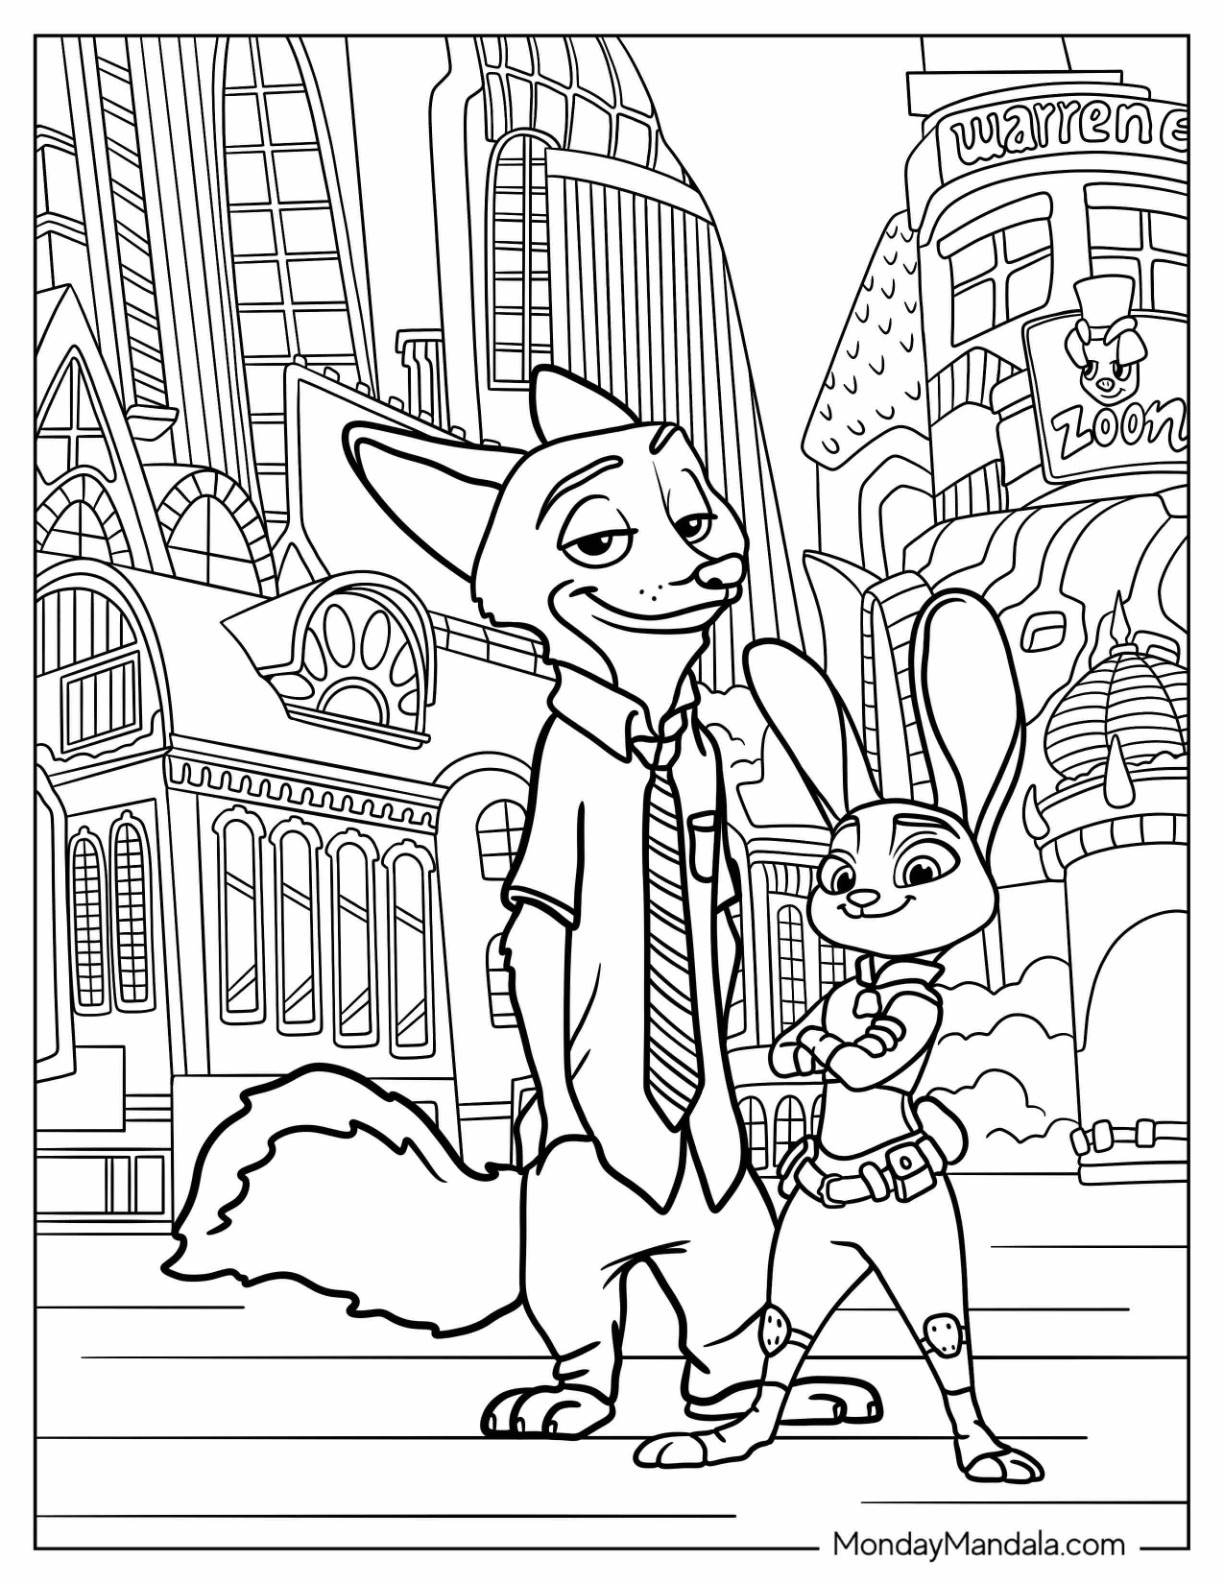 Zootopia coloring pages free pdf printables